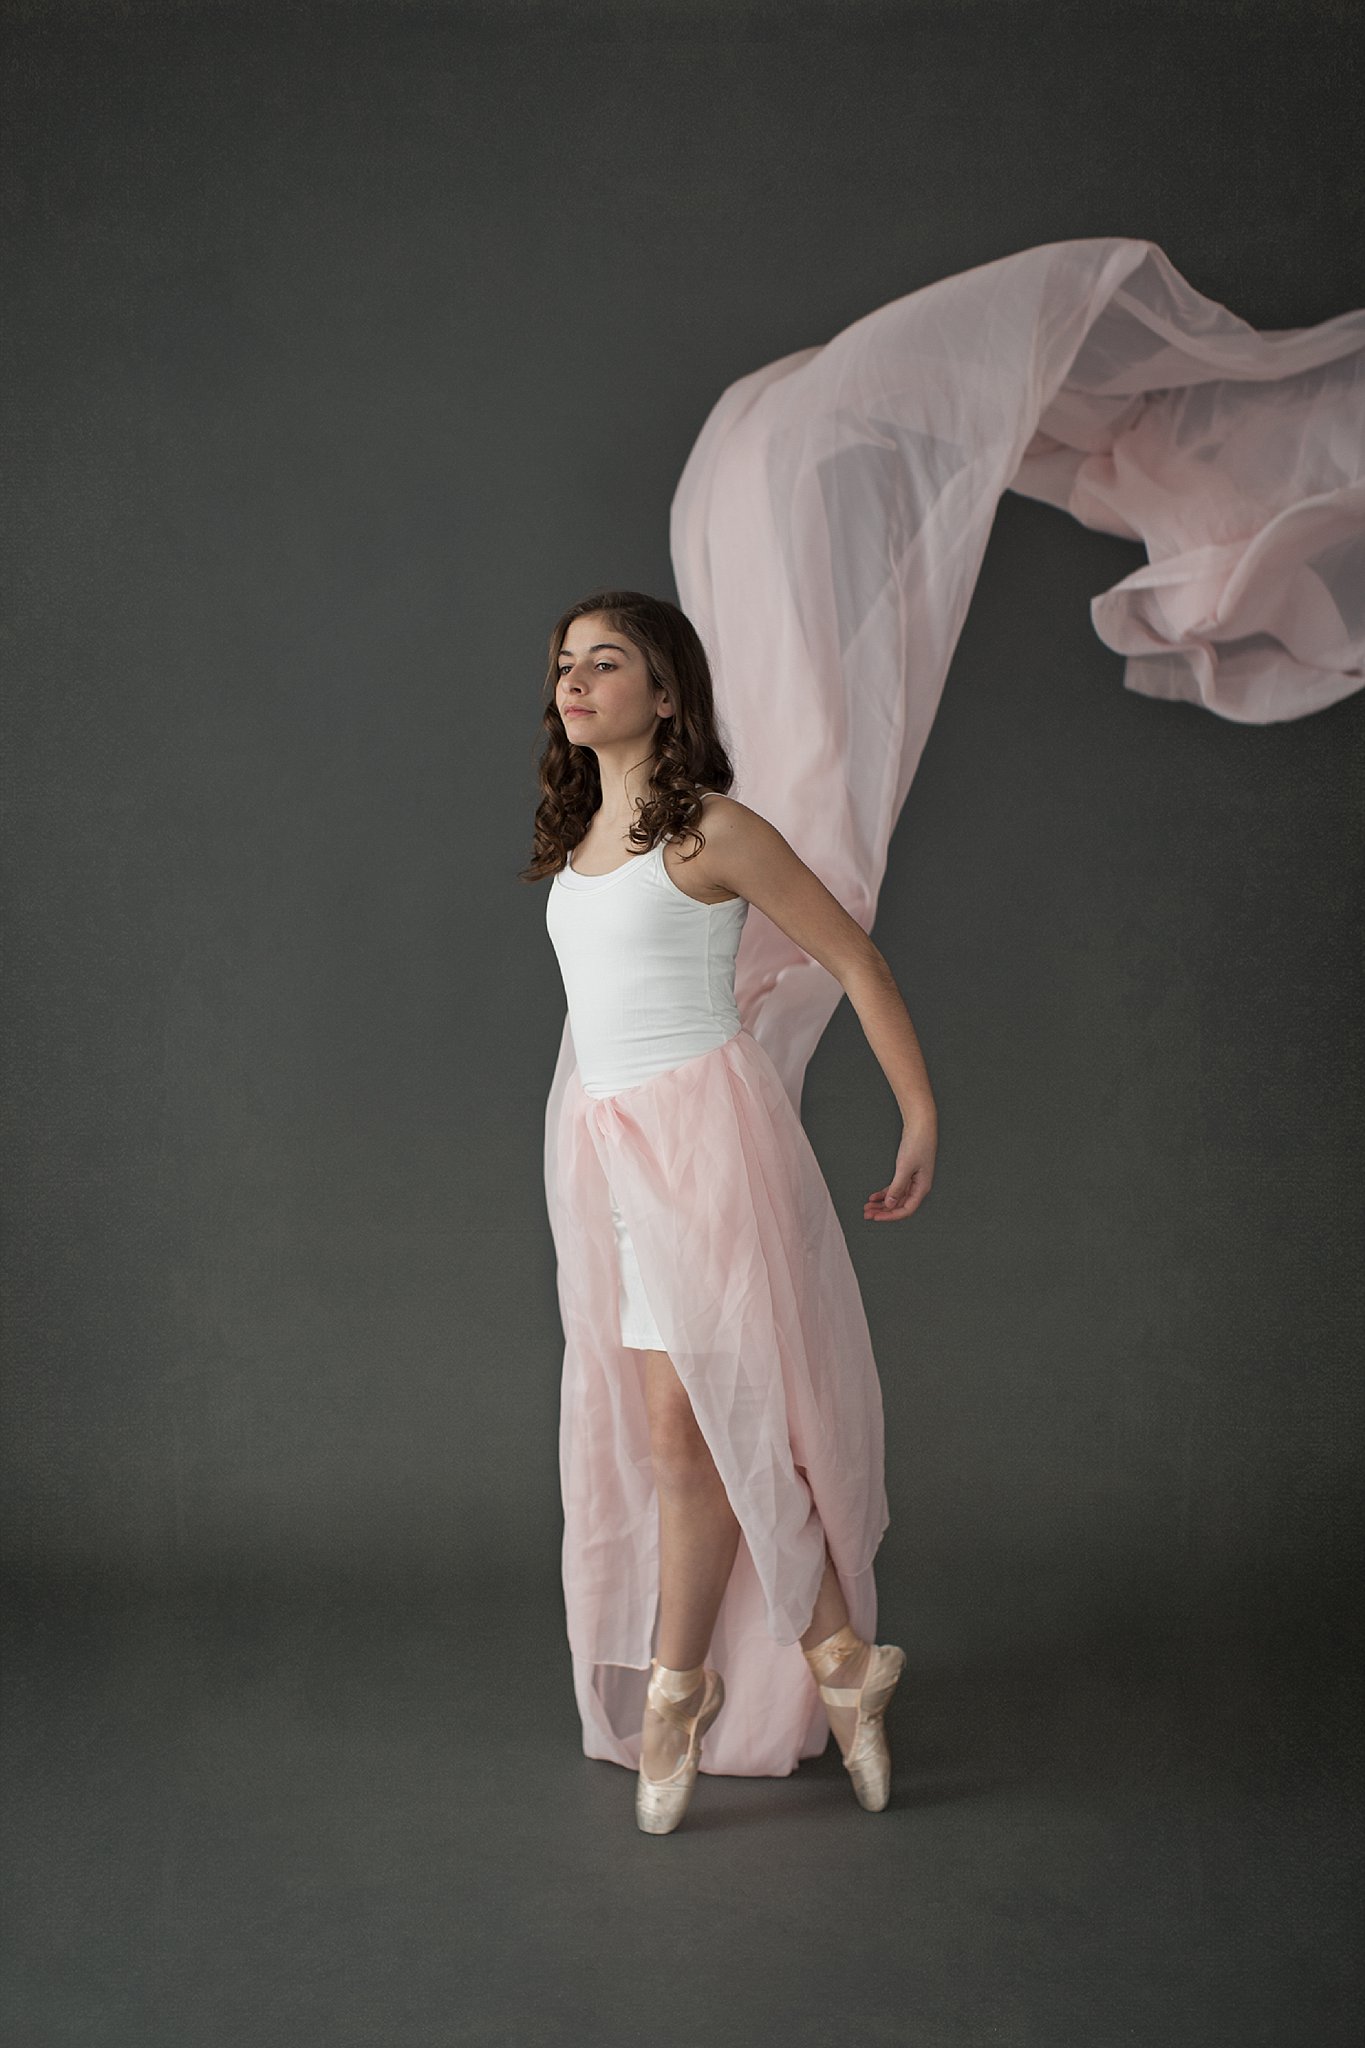 Portrait of a Young Dancer with Pink Skirt_0010.jpg